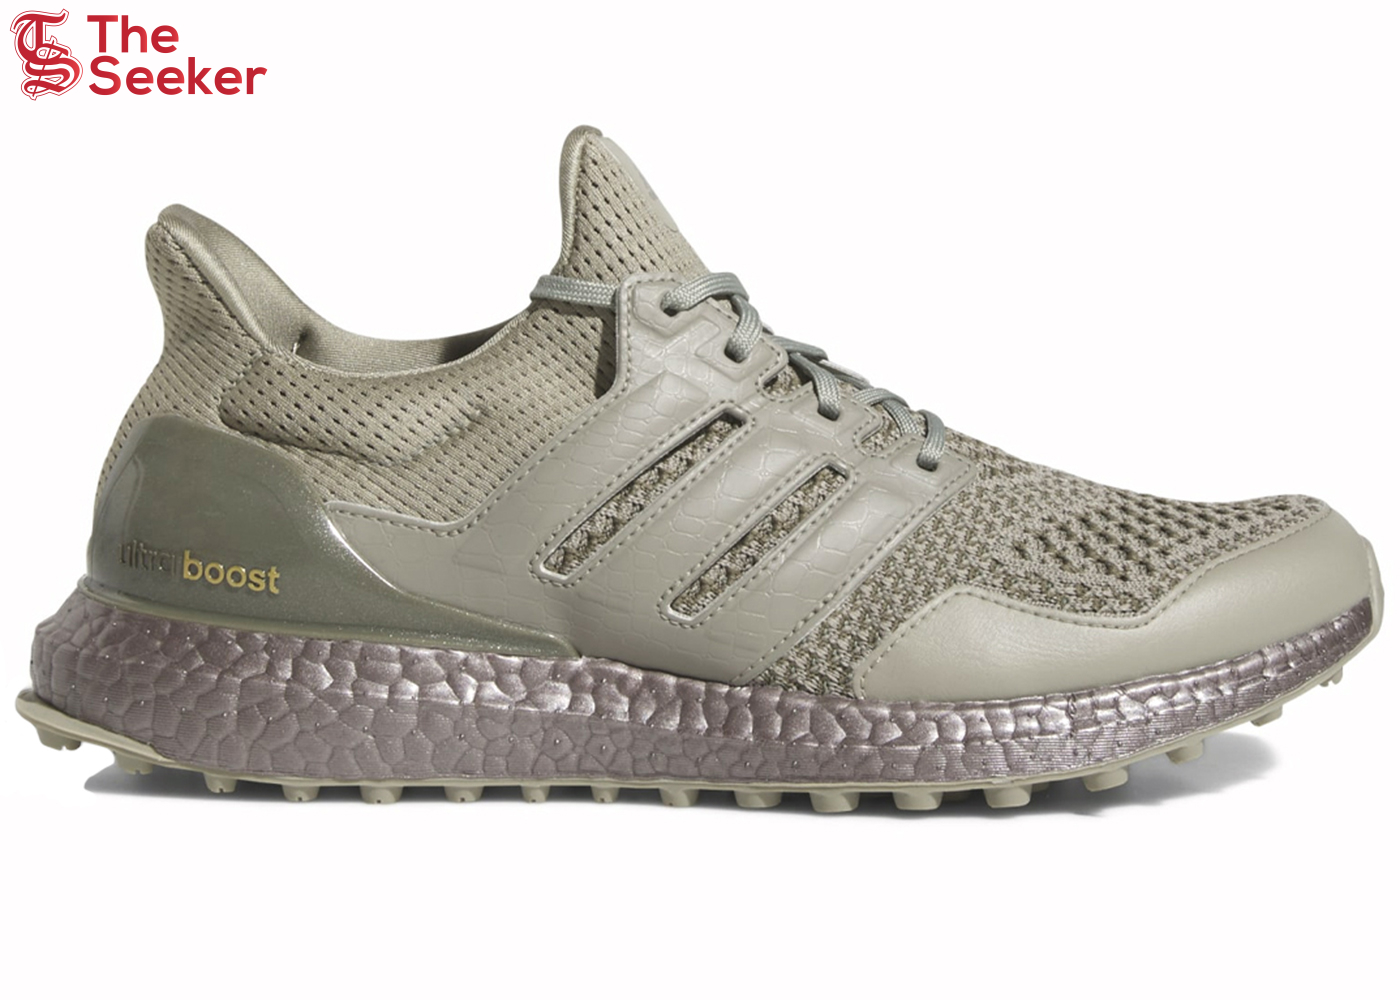 adidas Ultra Boost Spikeless Golf Silver Pebble Olive Strata